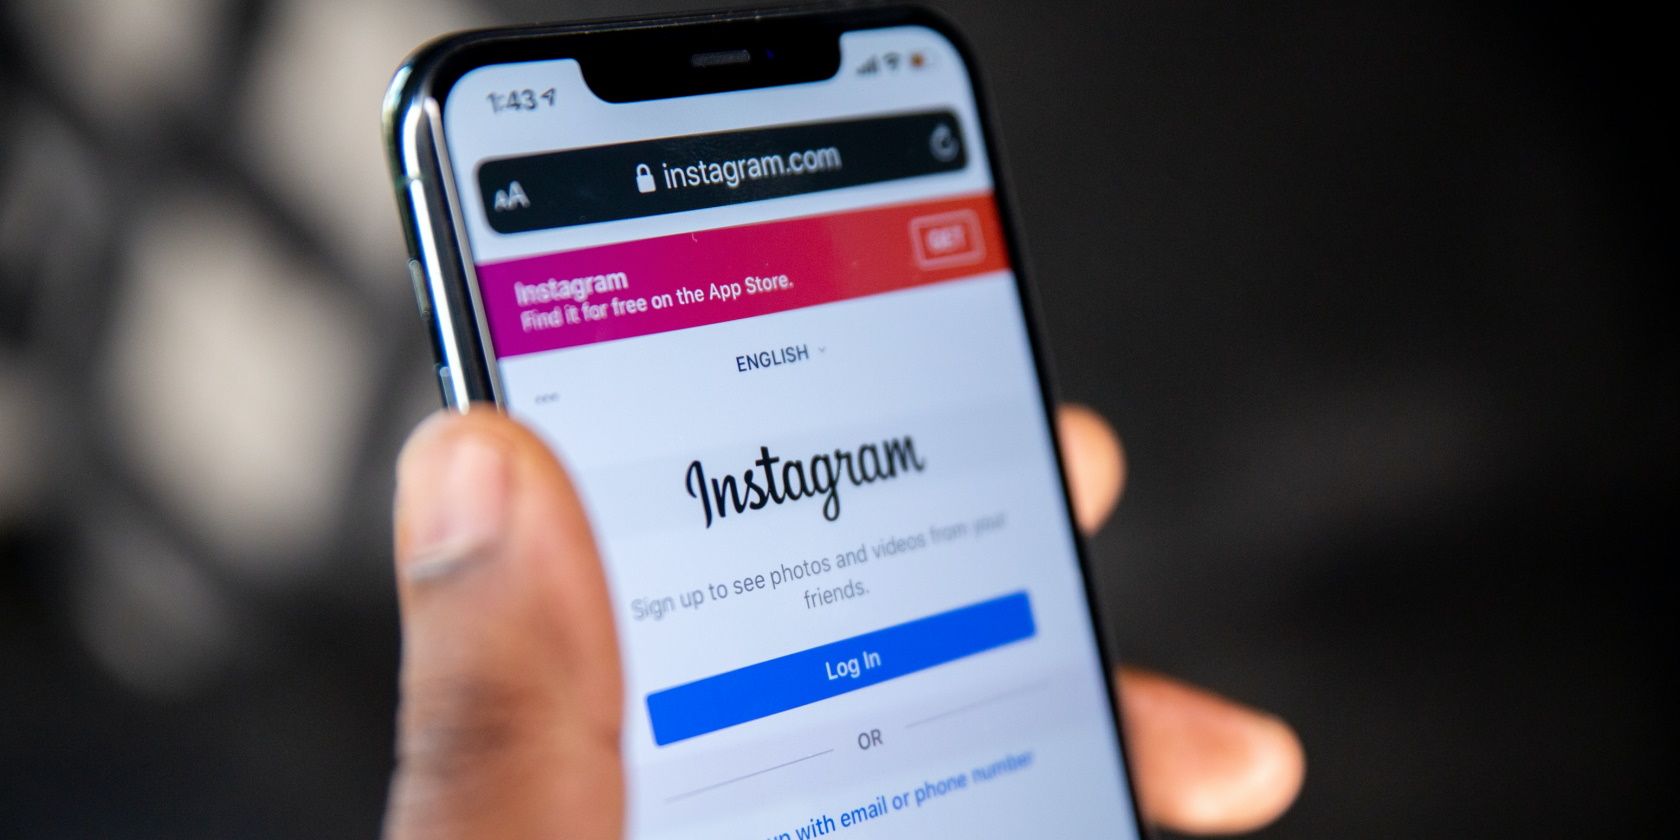 How to Make Your Own Instagram Account